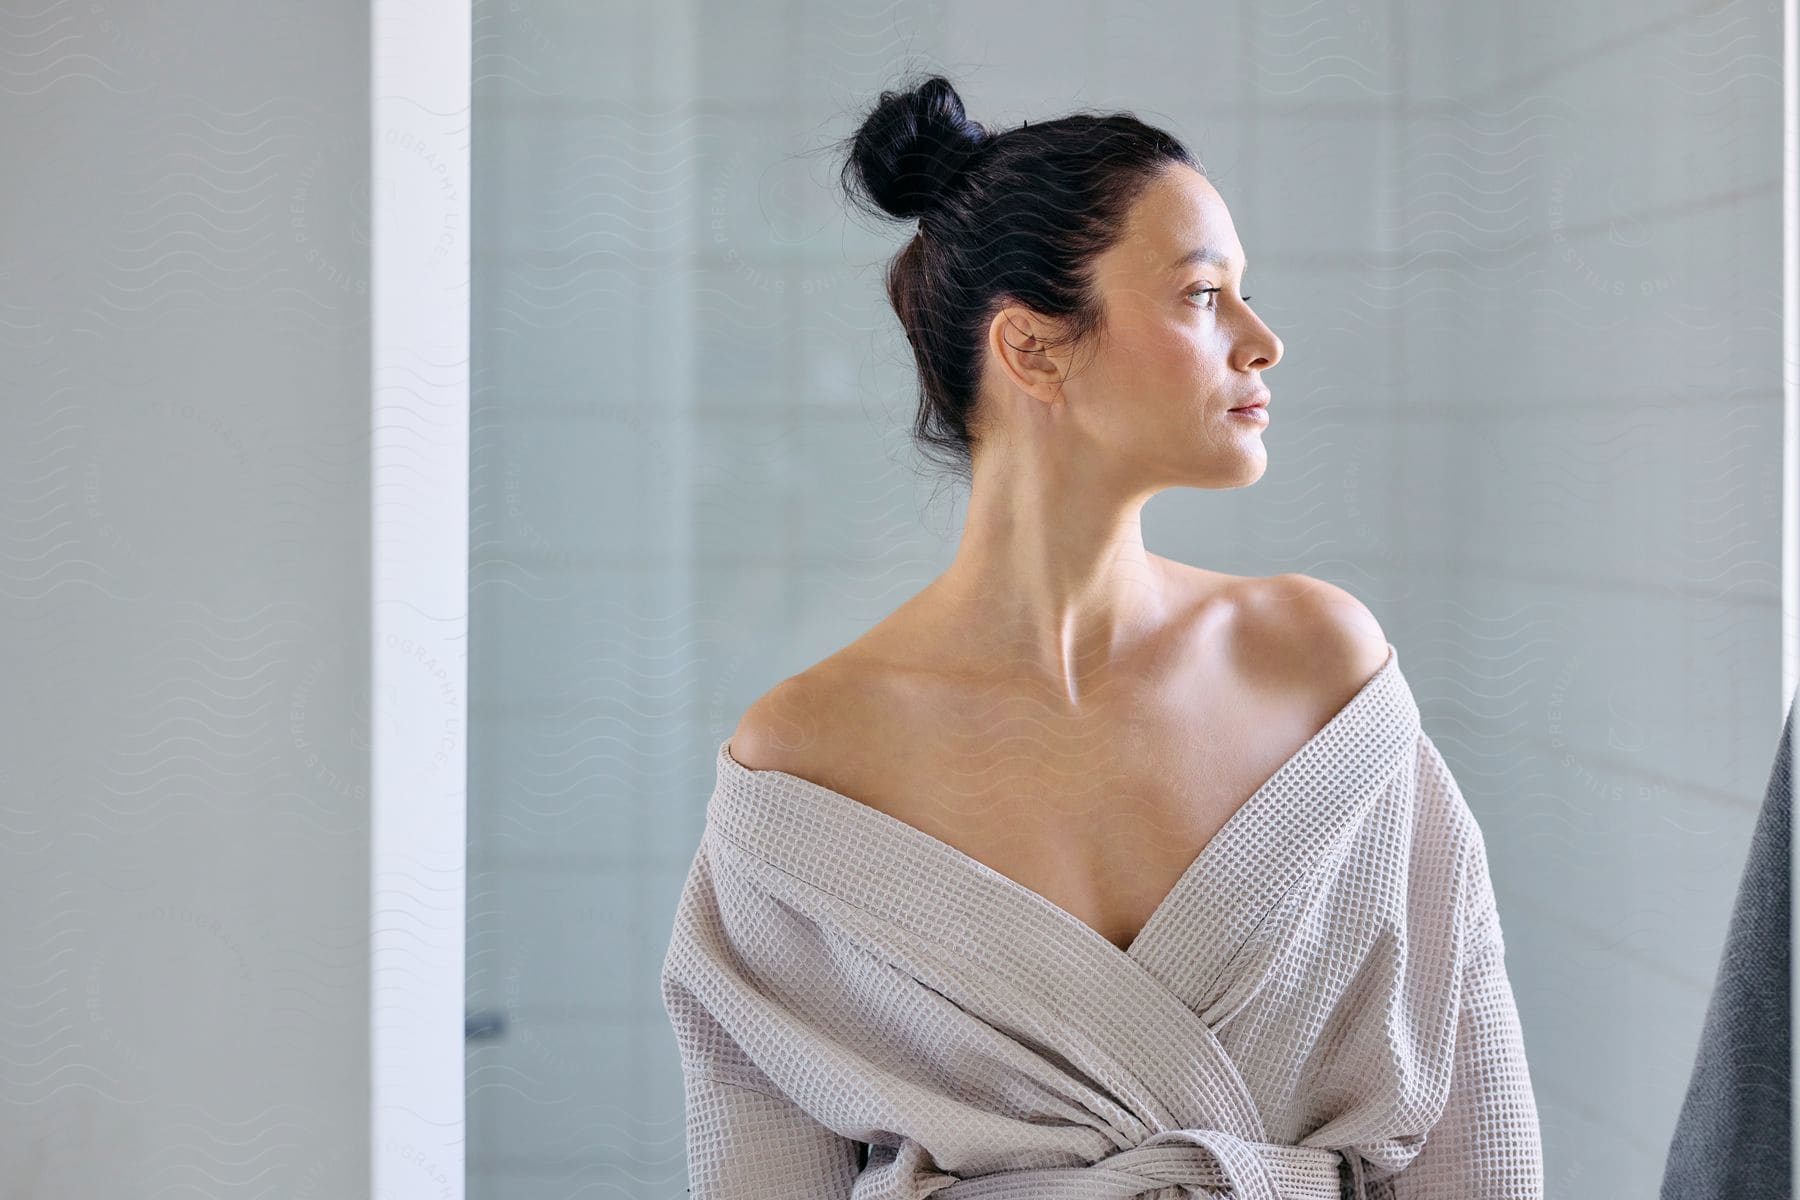 A woman in a bathroom, looking to her side, with her bath robe lowered to her shoulders.